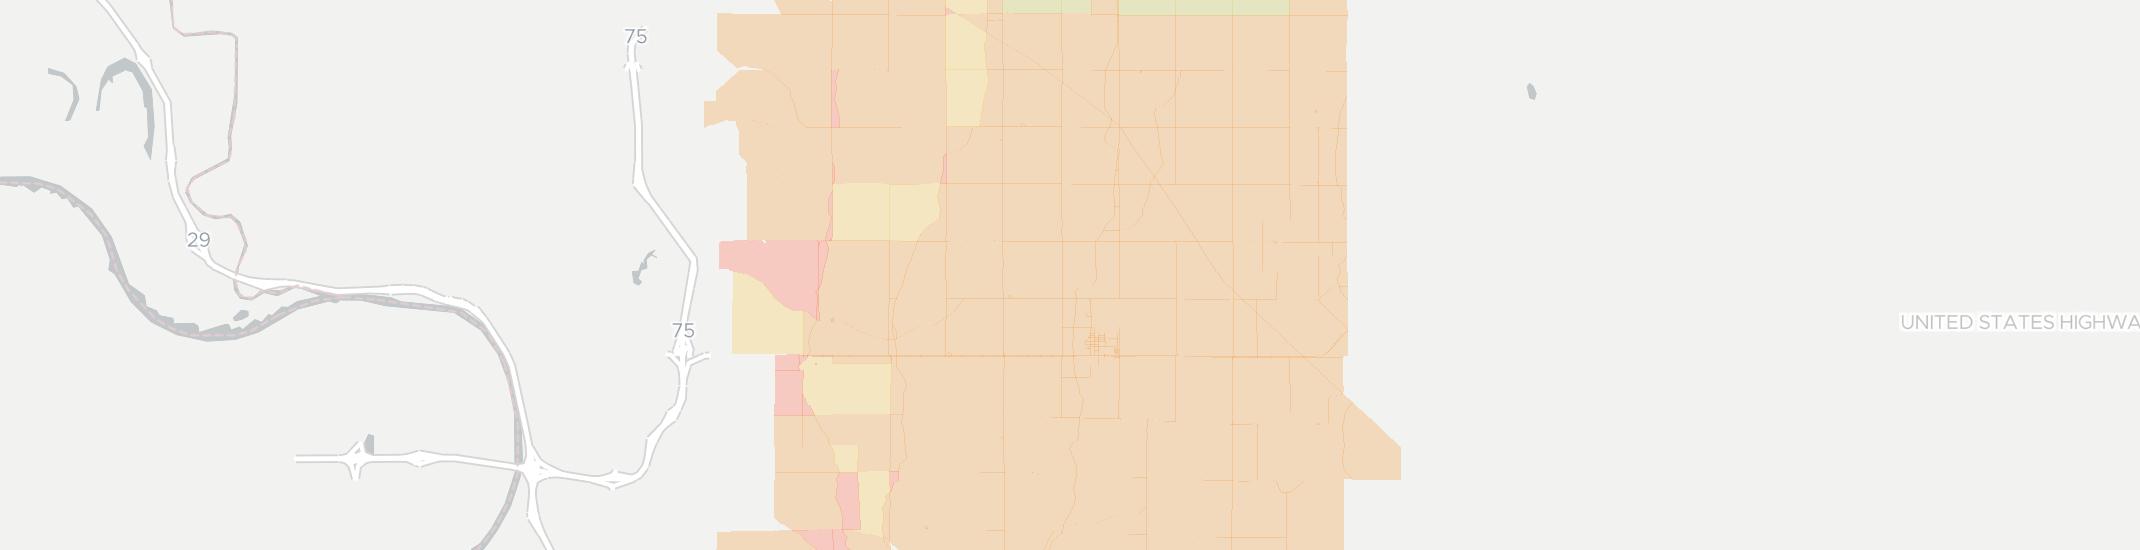 Lawton Internet Competition Map. Click for interactive map.